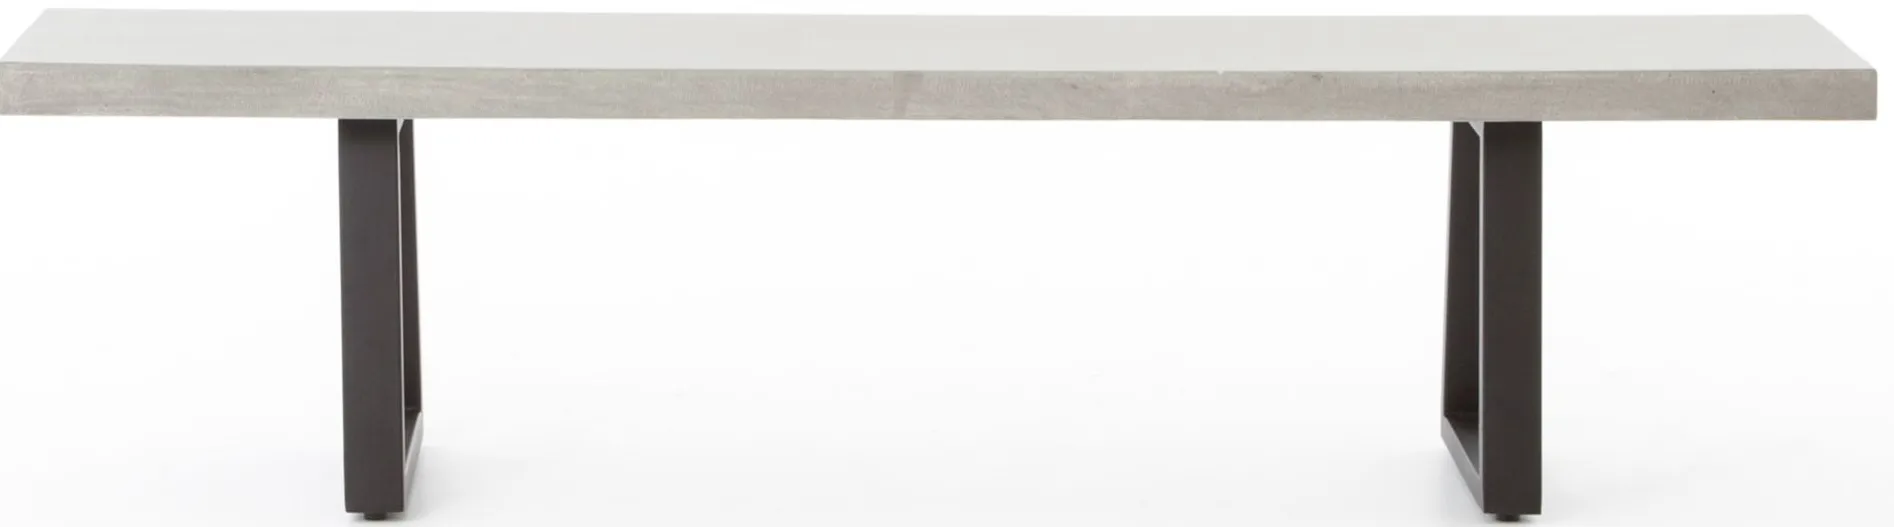 Blithe Outdoor Dining Bench in Light Gray by Four Hands